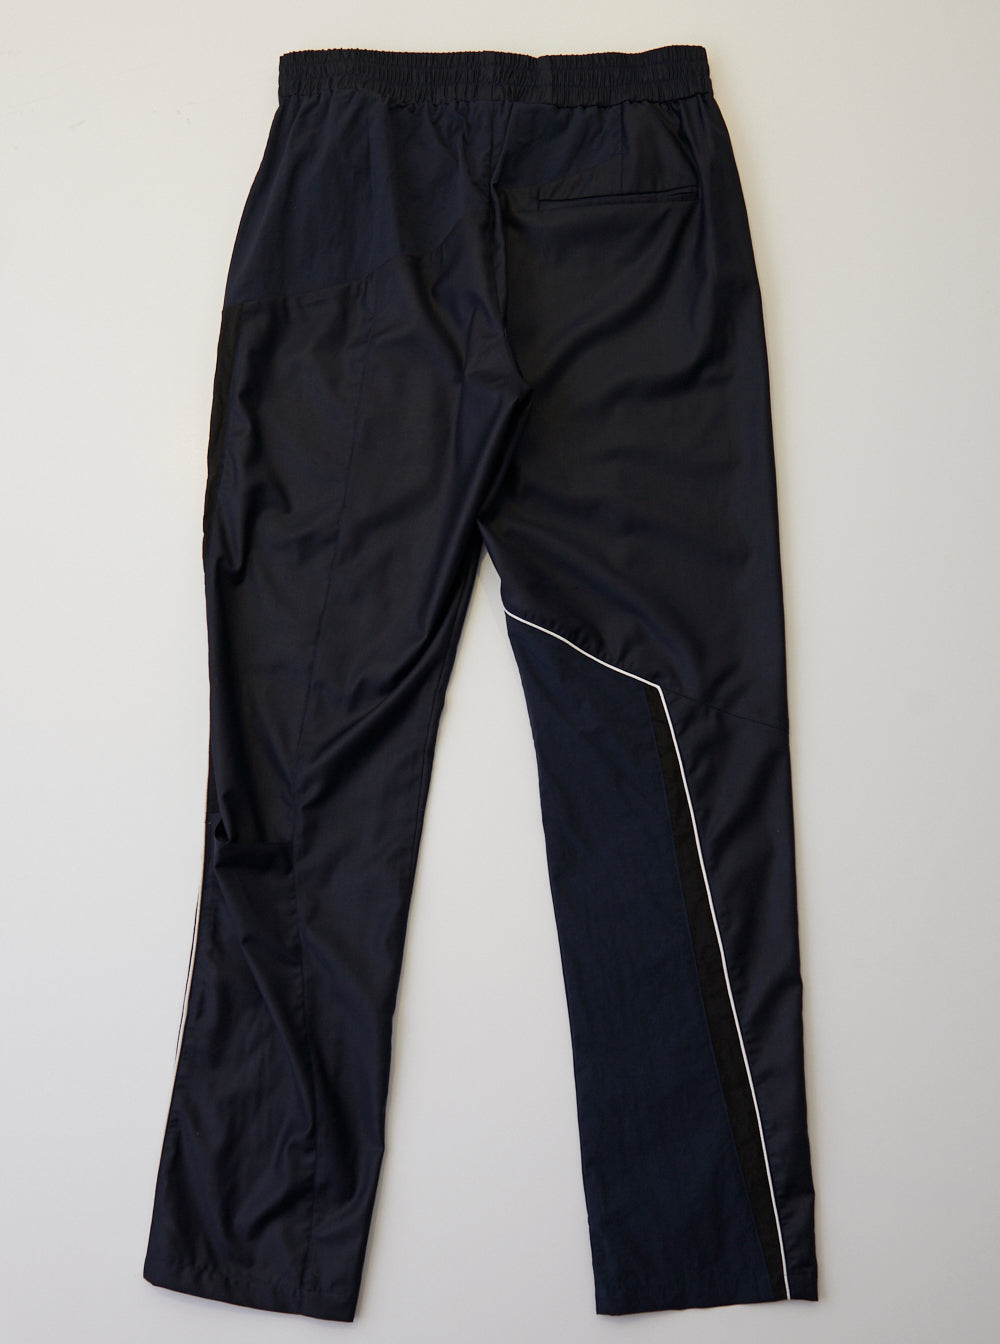  Vinti Andrews Panel Trousers Black Suiting